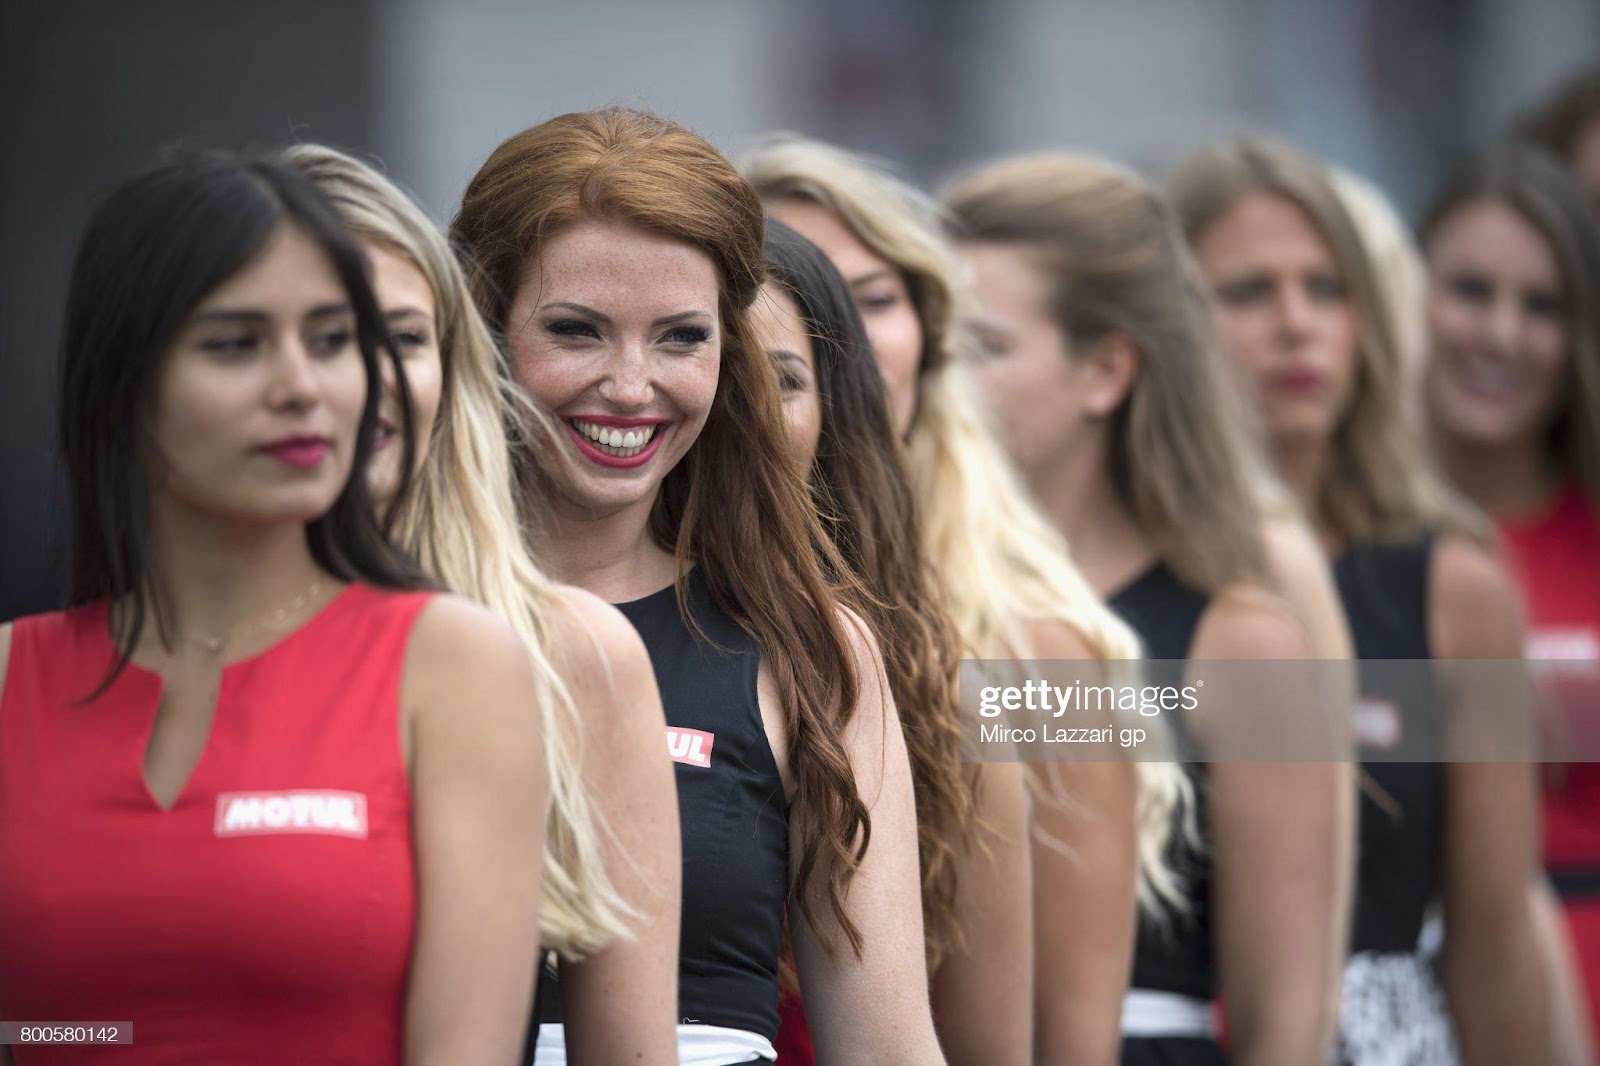 D:\Documenti\posts\posts\Women and motorsport\foto\Getty e altre\the-grid-girls-smile-in-paddock-during-the-motogp-netherlands-on-24-picture-id800580142.jpg